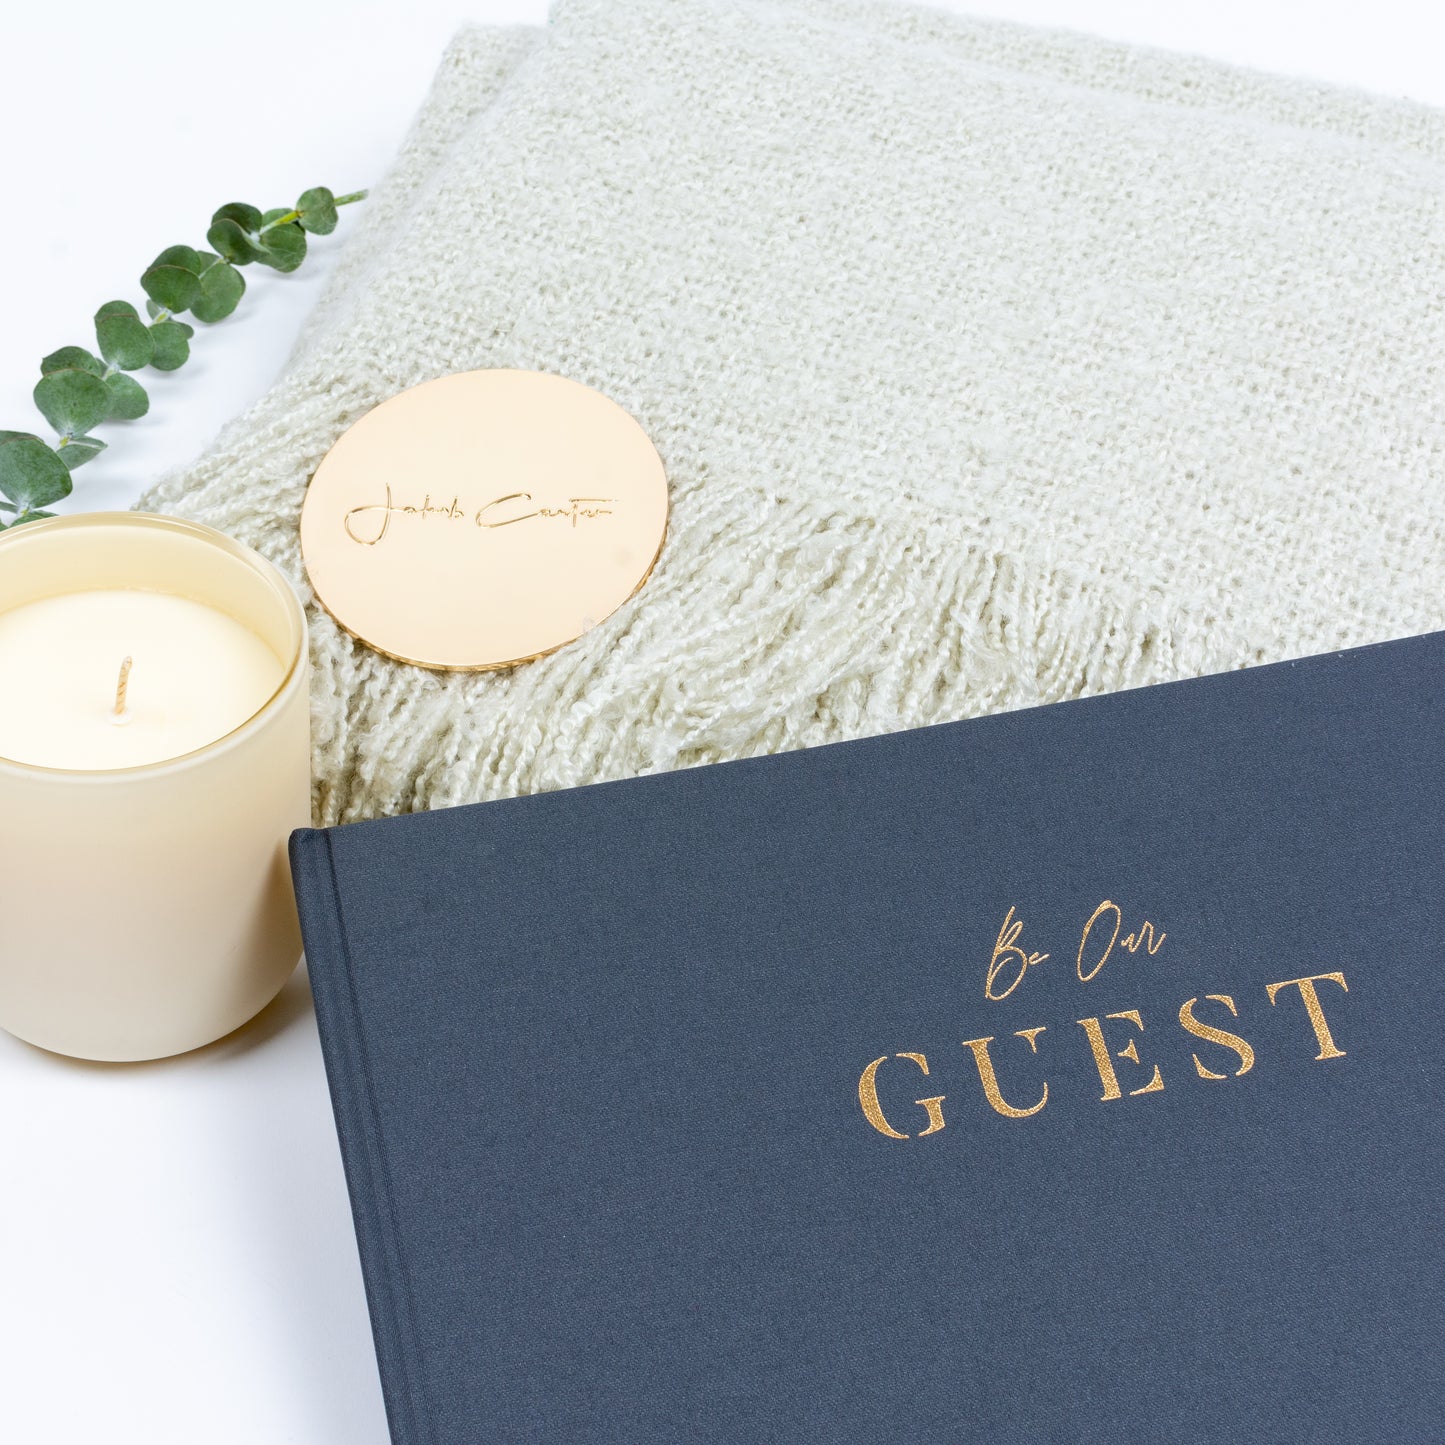 Closeup of guest book, soft throw, scented candle.